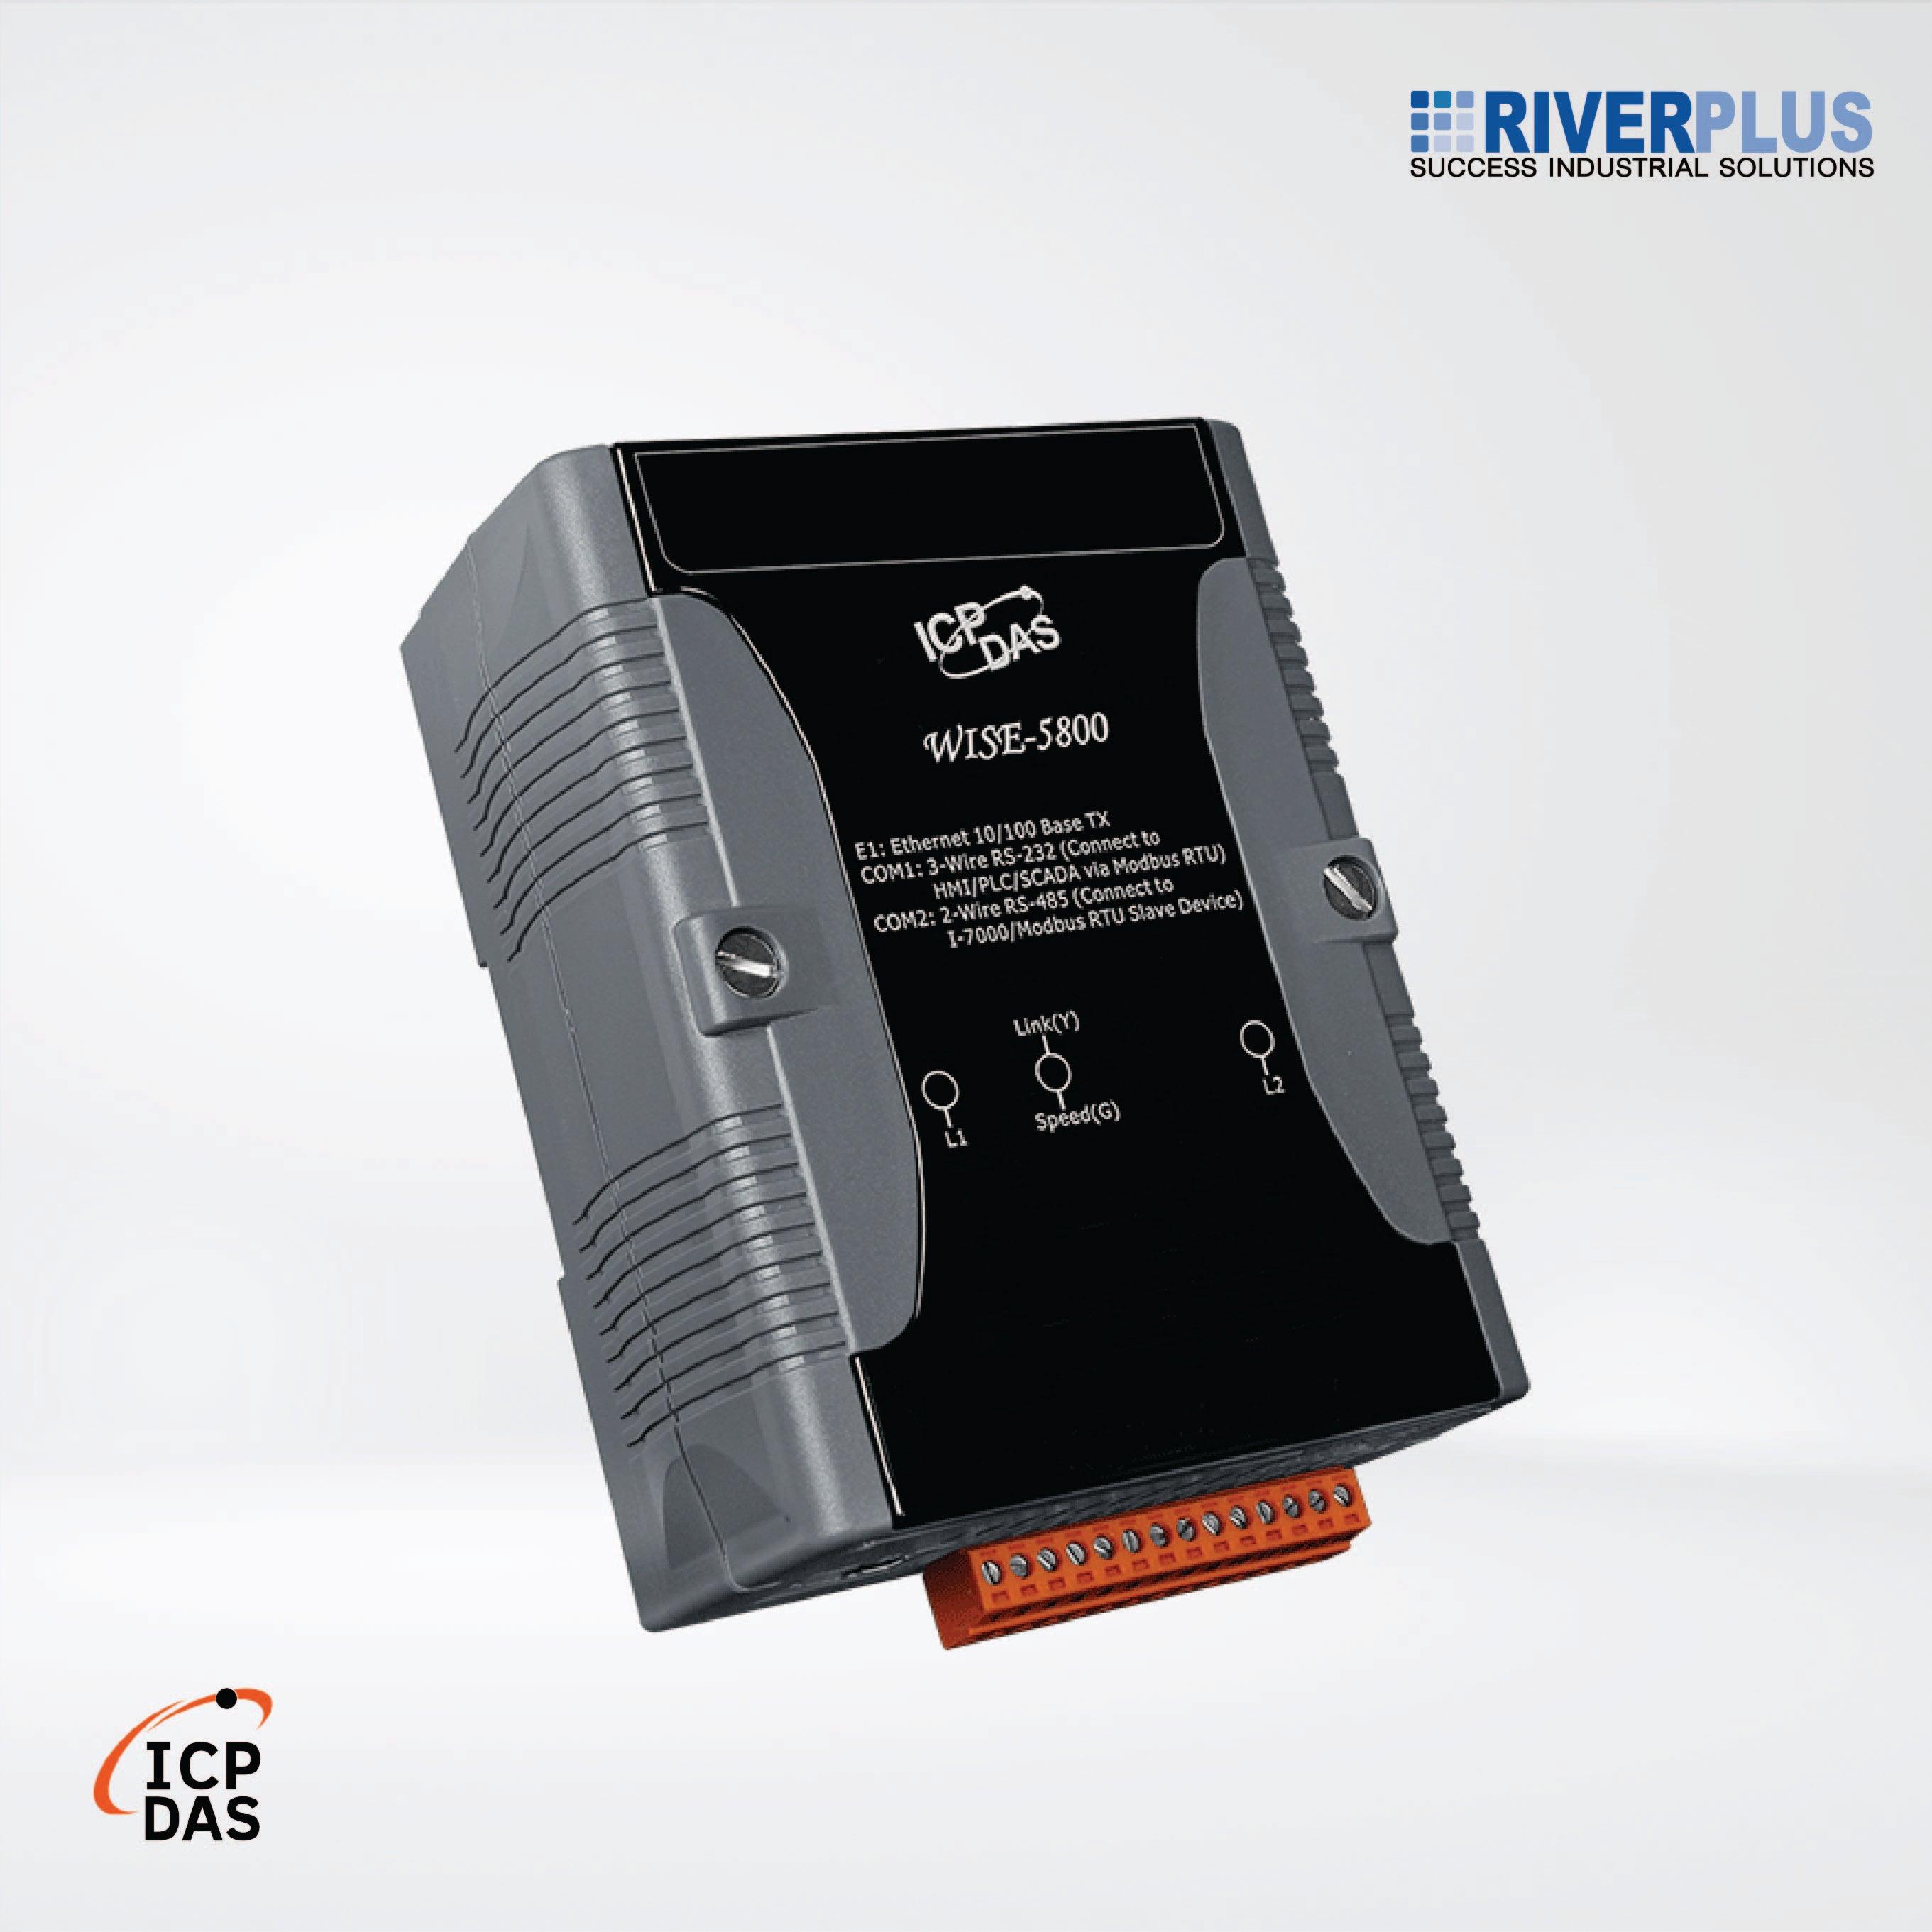 WISE-5800 Intelligent User-defined I/O & Data Log Module for Modbus RTU or DCON Devices - Riverplus